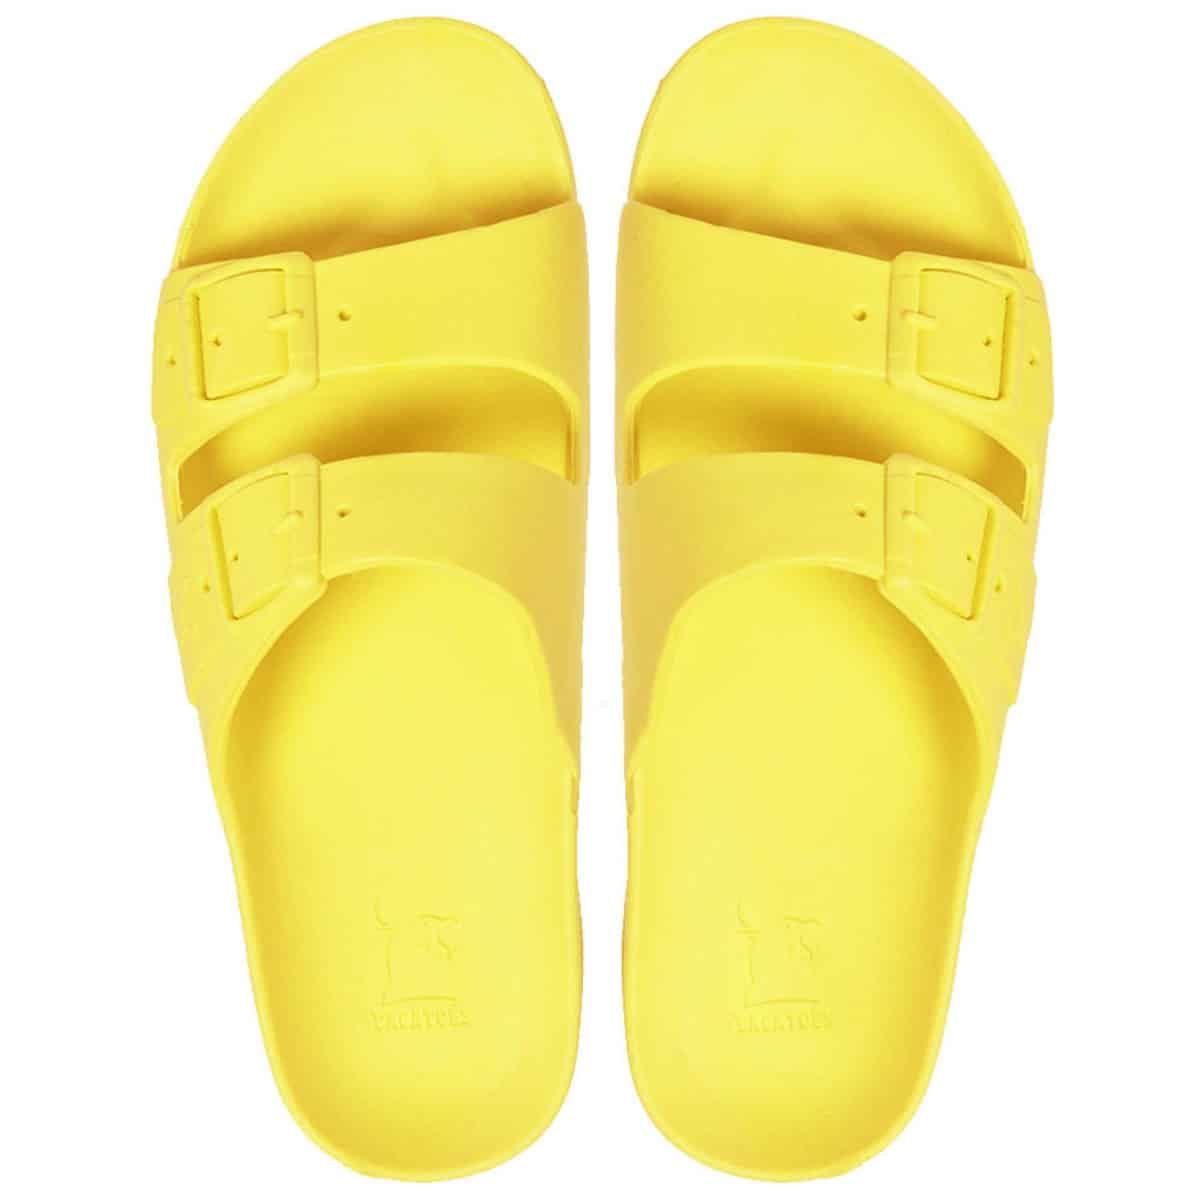 Bahia Sandals in Fluo Yellow